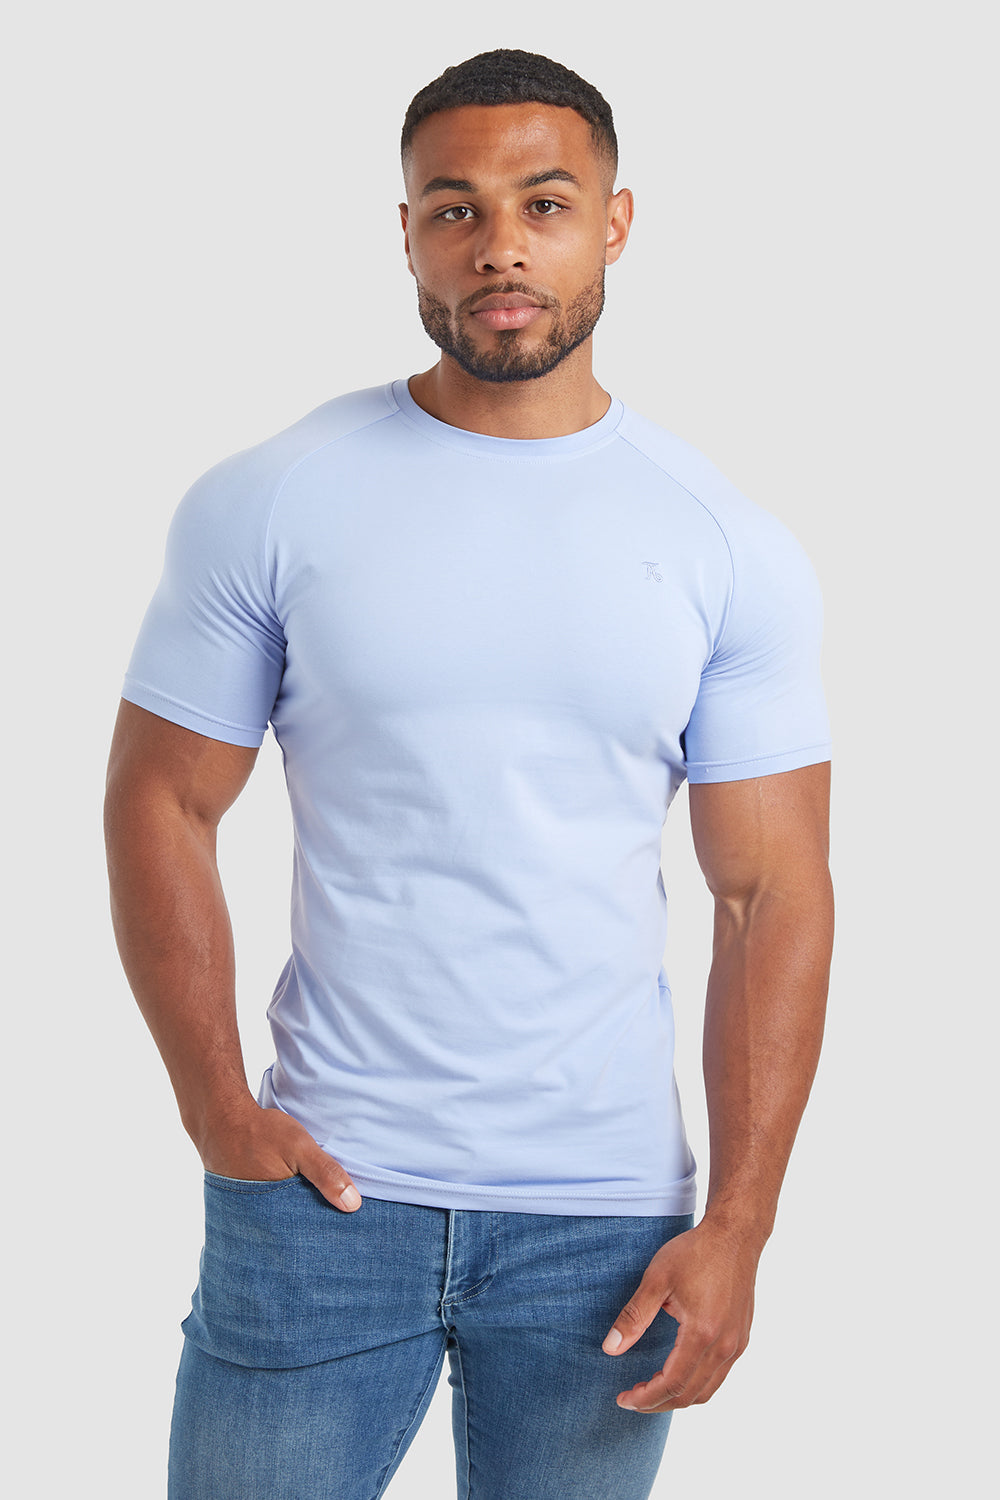 Muscle Fit T-Shirt in Lilac Haze - TAILORED ATHLETE - ROW